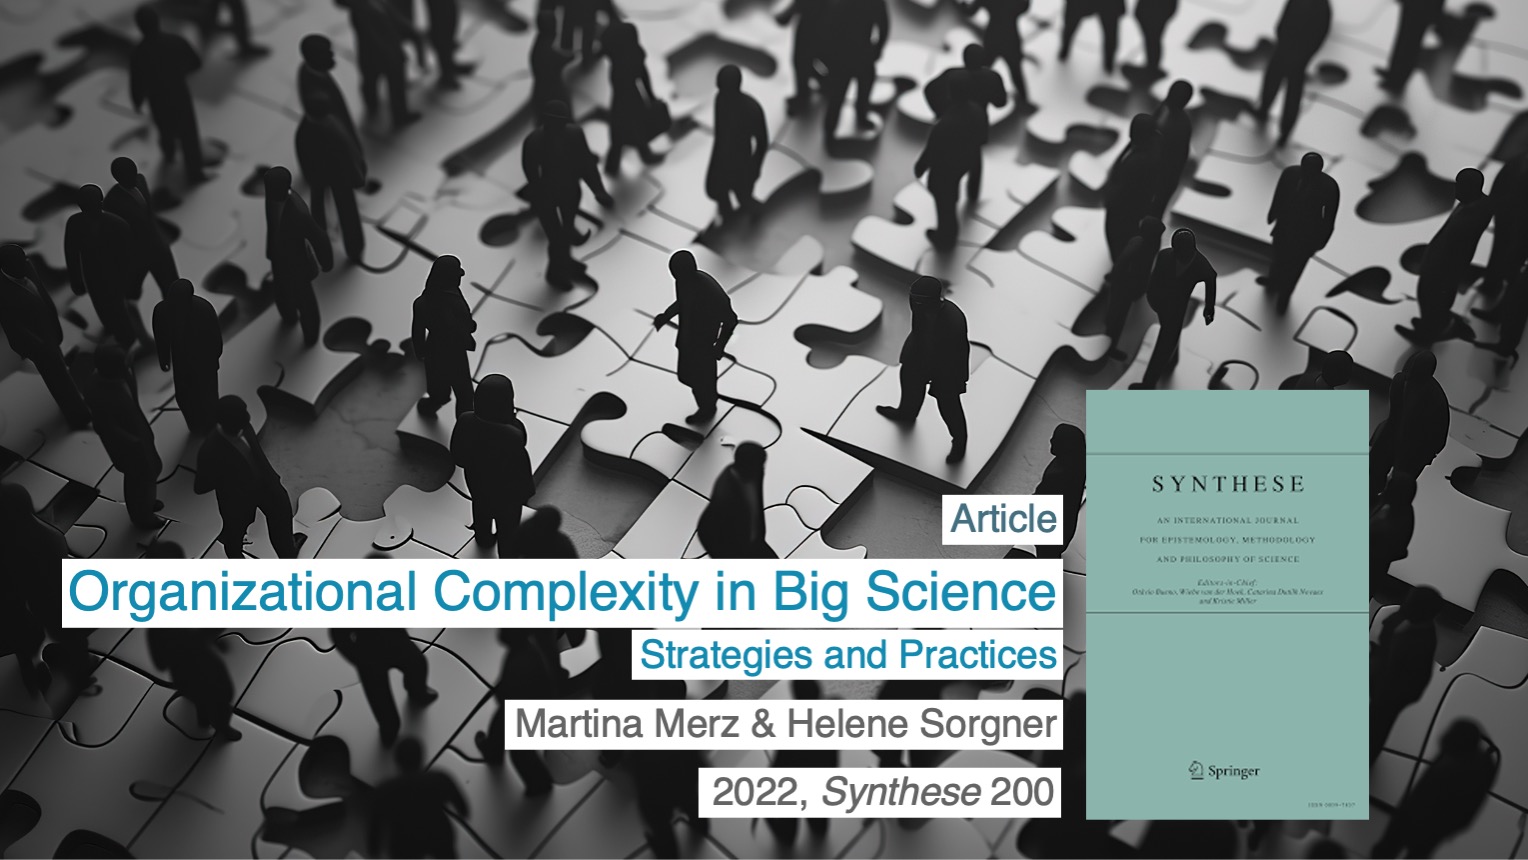 Martina Merz, Helene Sorgner: Organizational Complexity in Big Science. Strategies and Practices. 2022, Synthese 200.